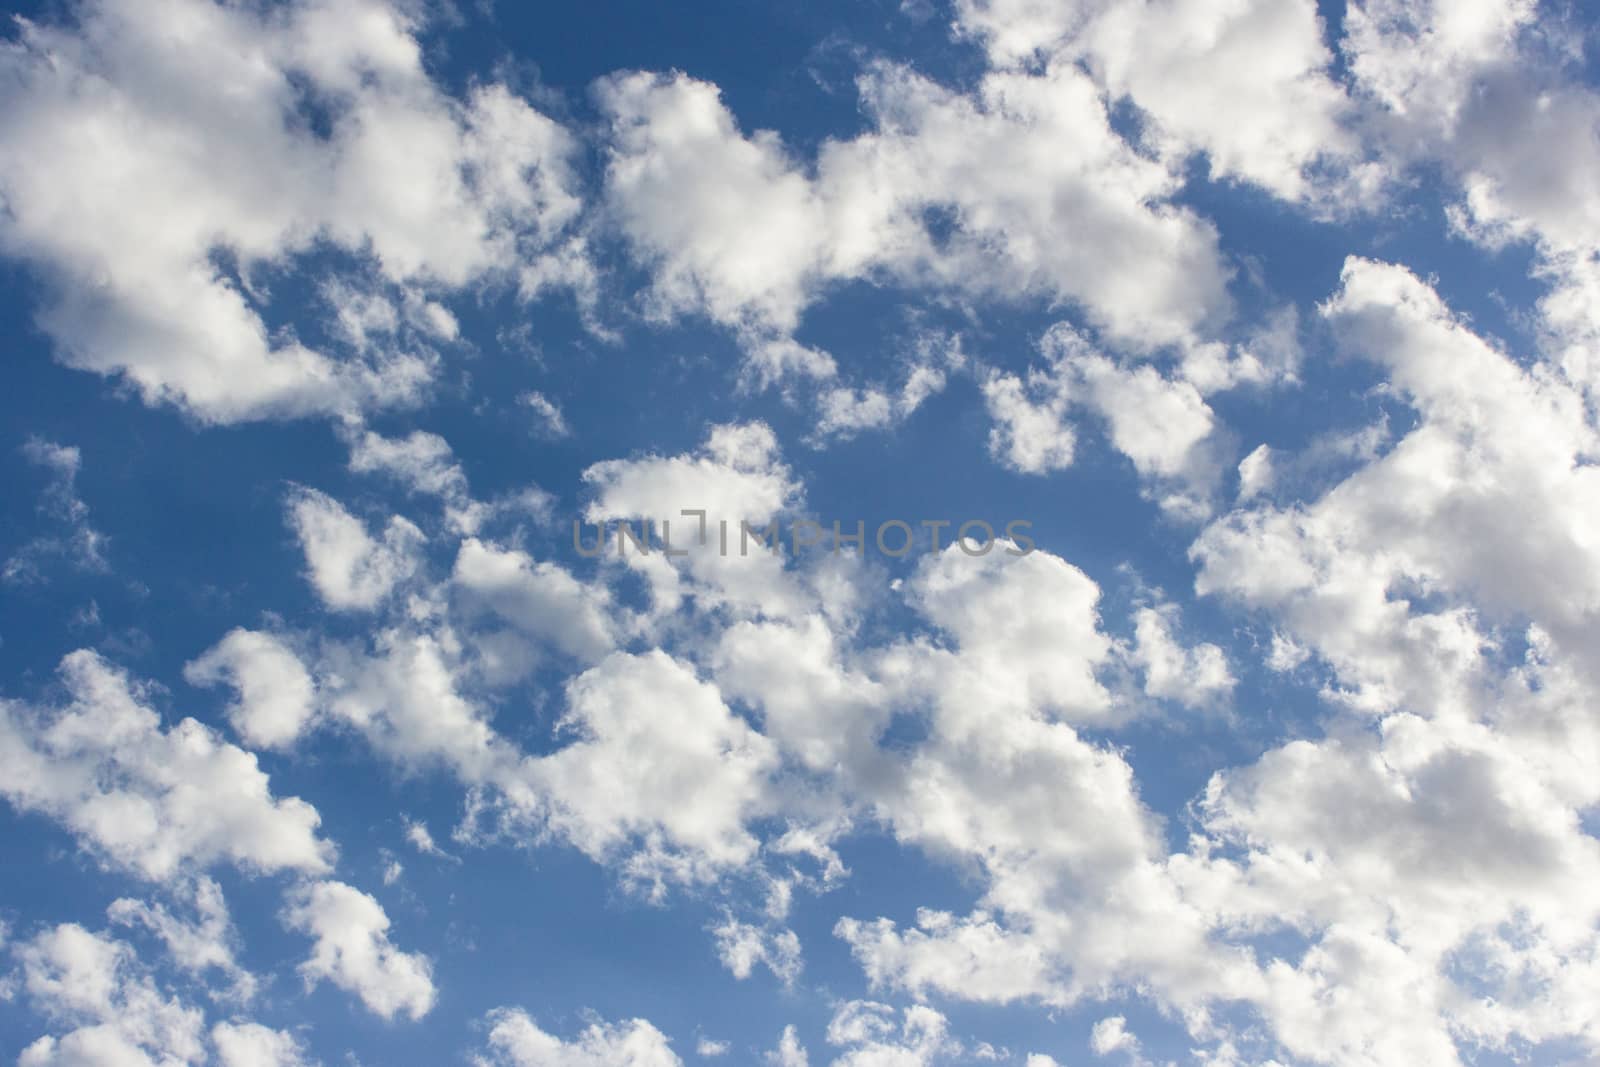 sky with small clouds by goghy73